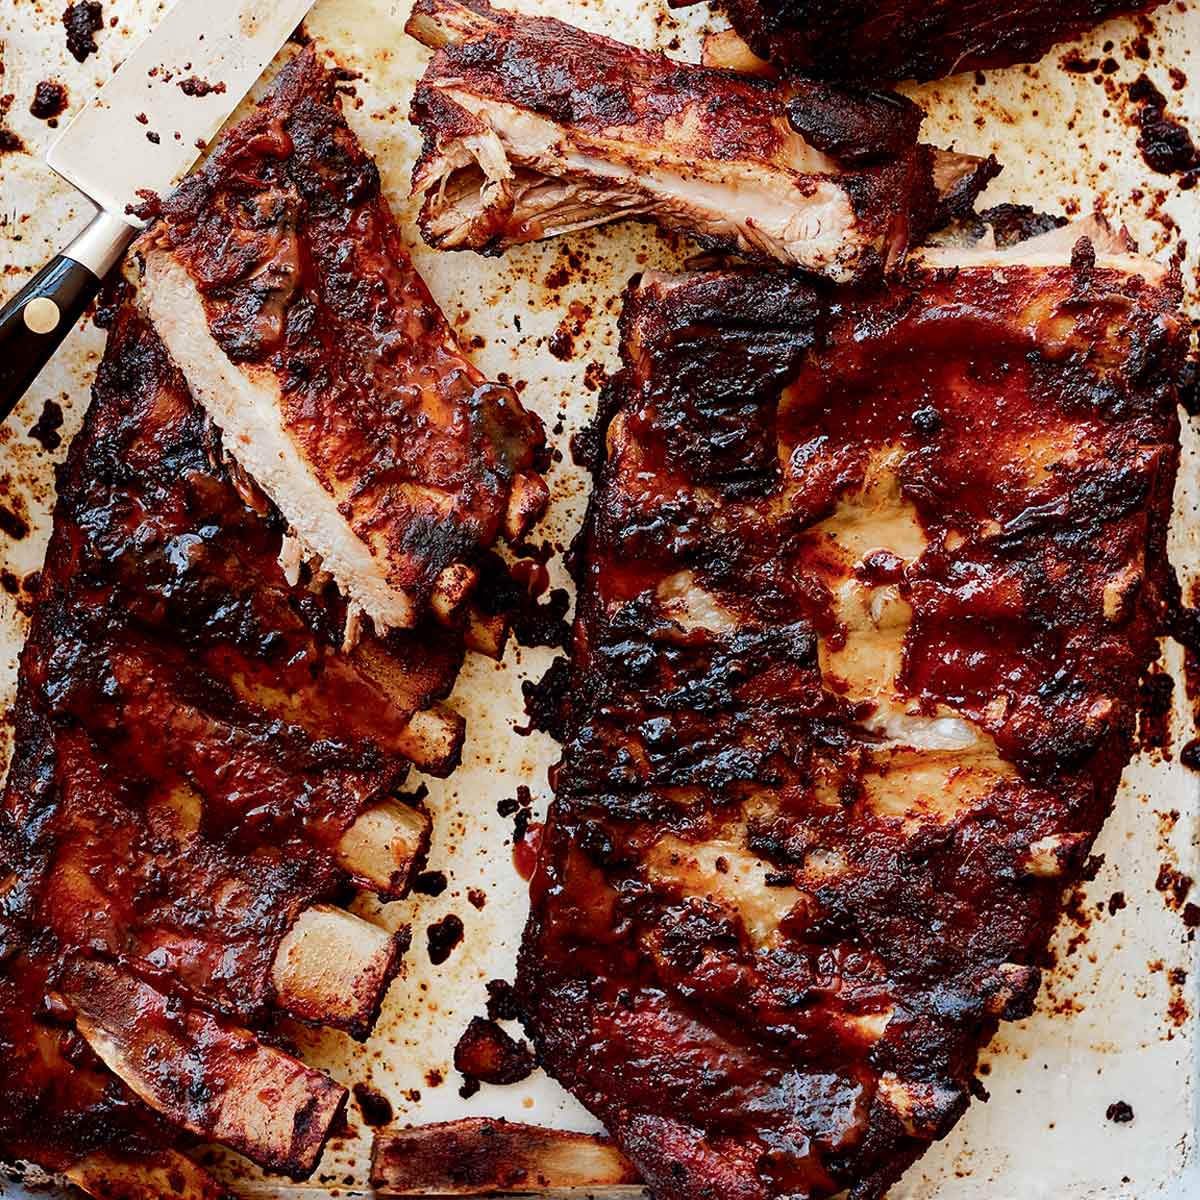 Two slabs of St. Louis style ribs from Alex Guarnaschelli with some cut into individual ribs and a knife lying in the middle.